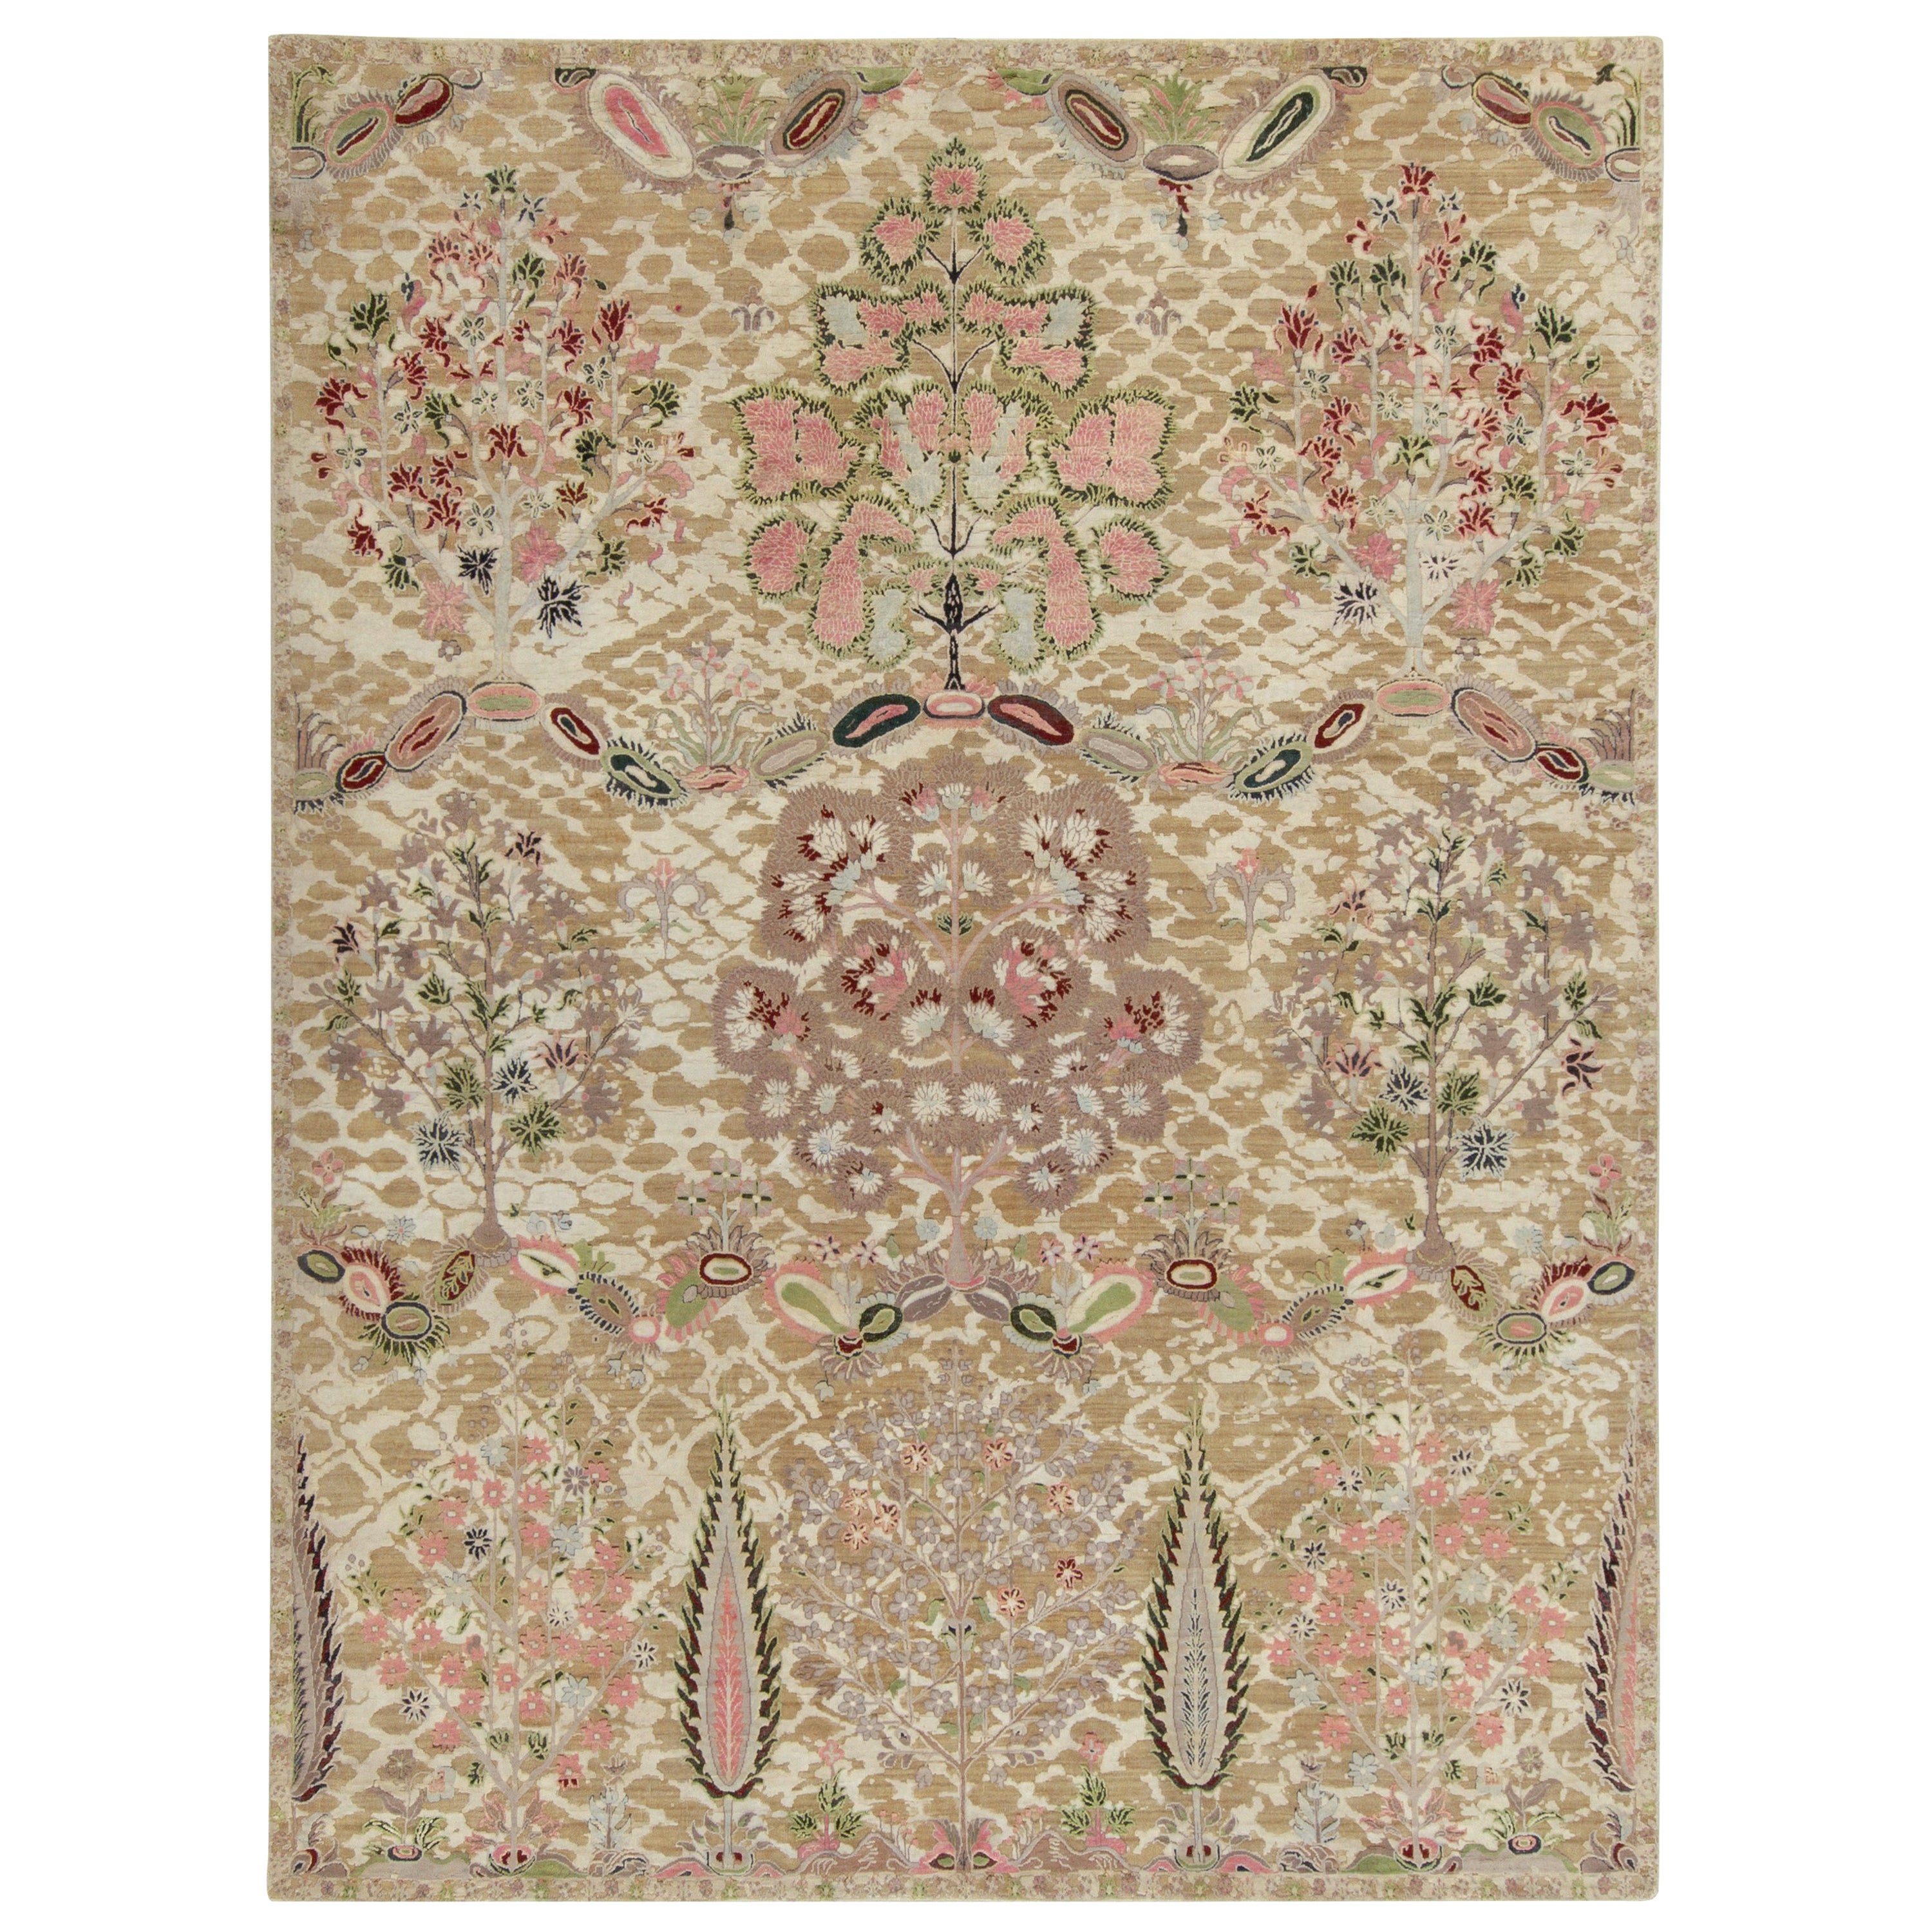 Rug & Kilim’s Classic Style Rug in Green, Pink and Beige-Brown Floral Pattern For Sale